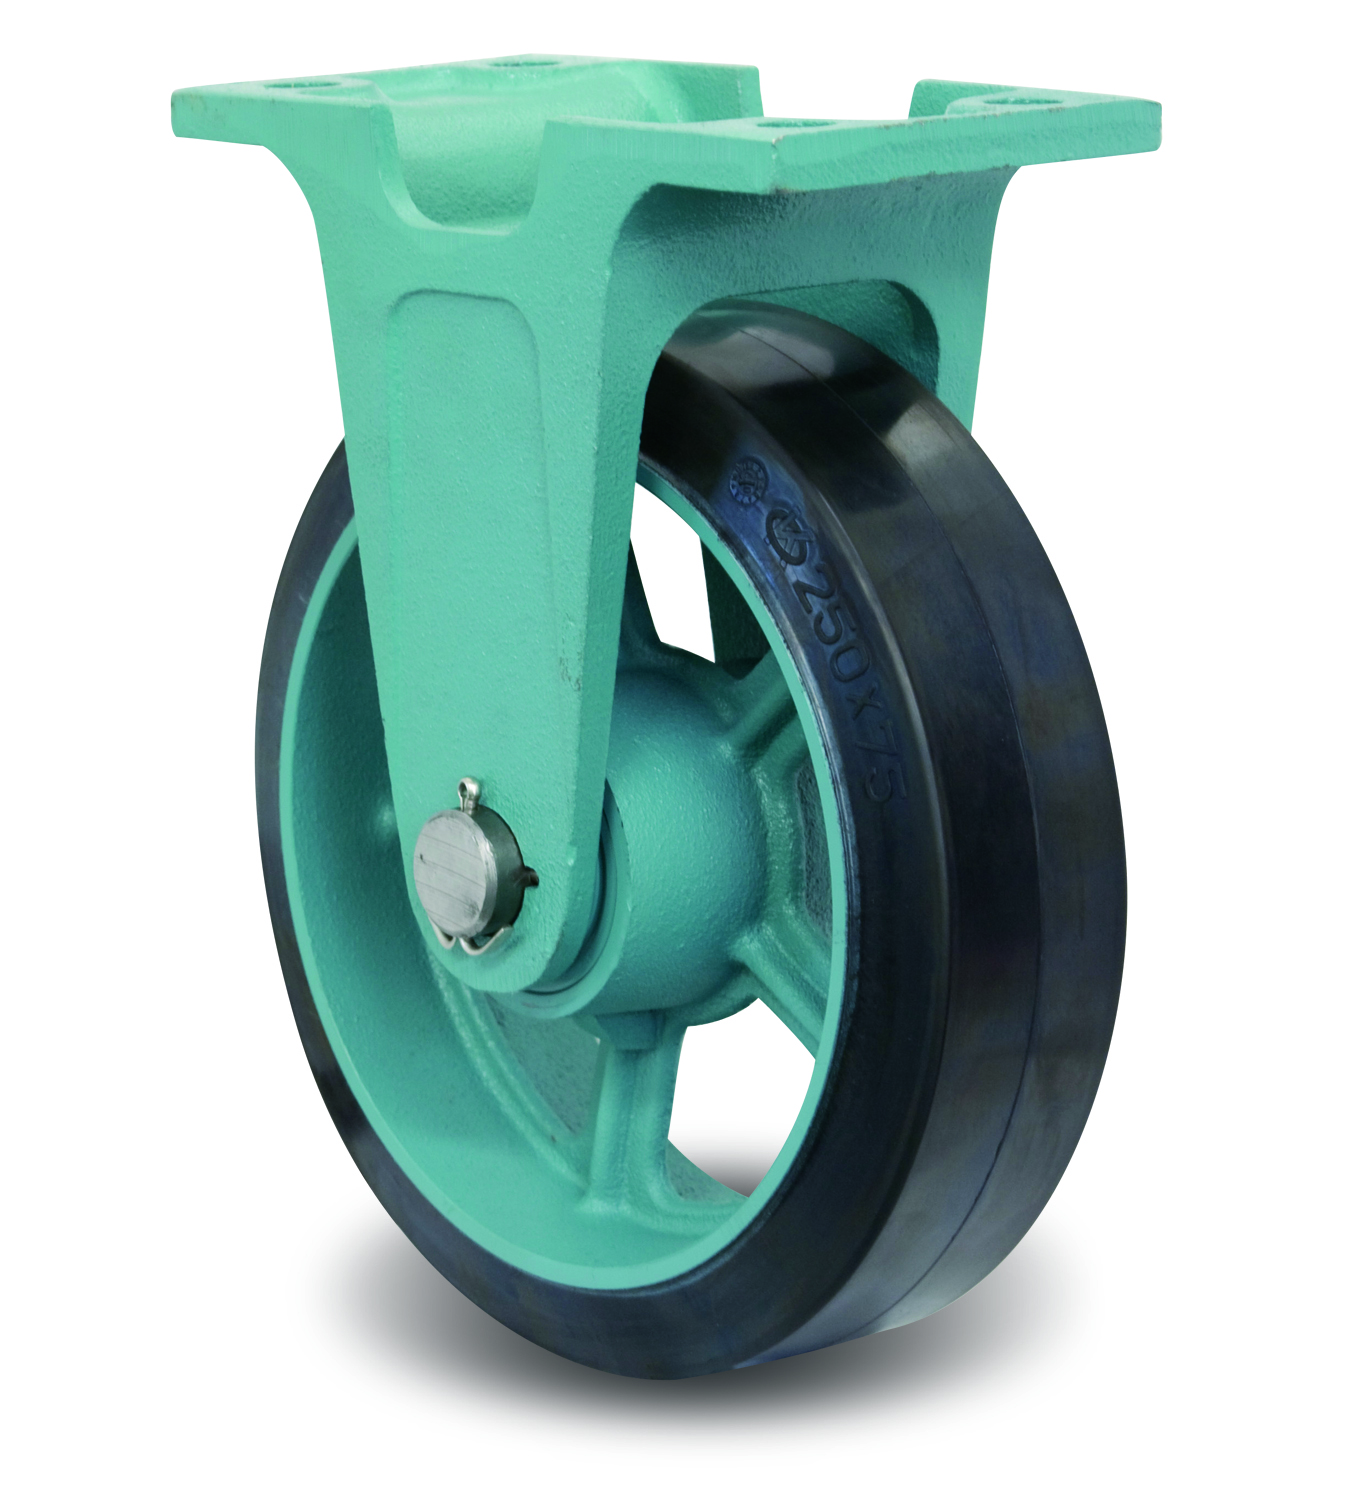 Ductile Caster Wide Type, Fixed MG-W Metal Fittings, E-MG-W (EMG-W200X50) 